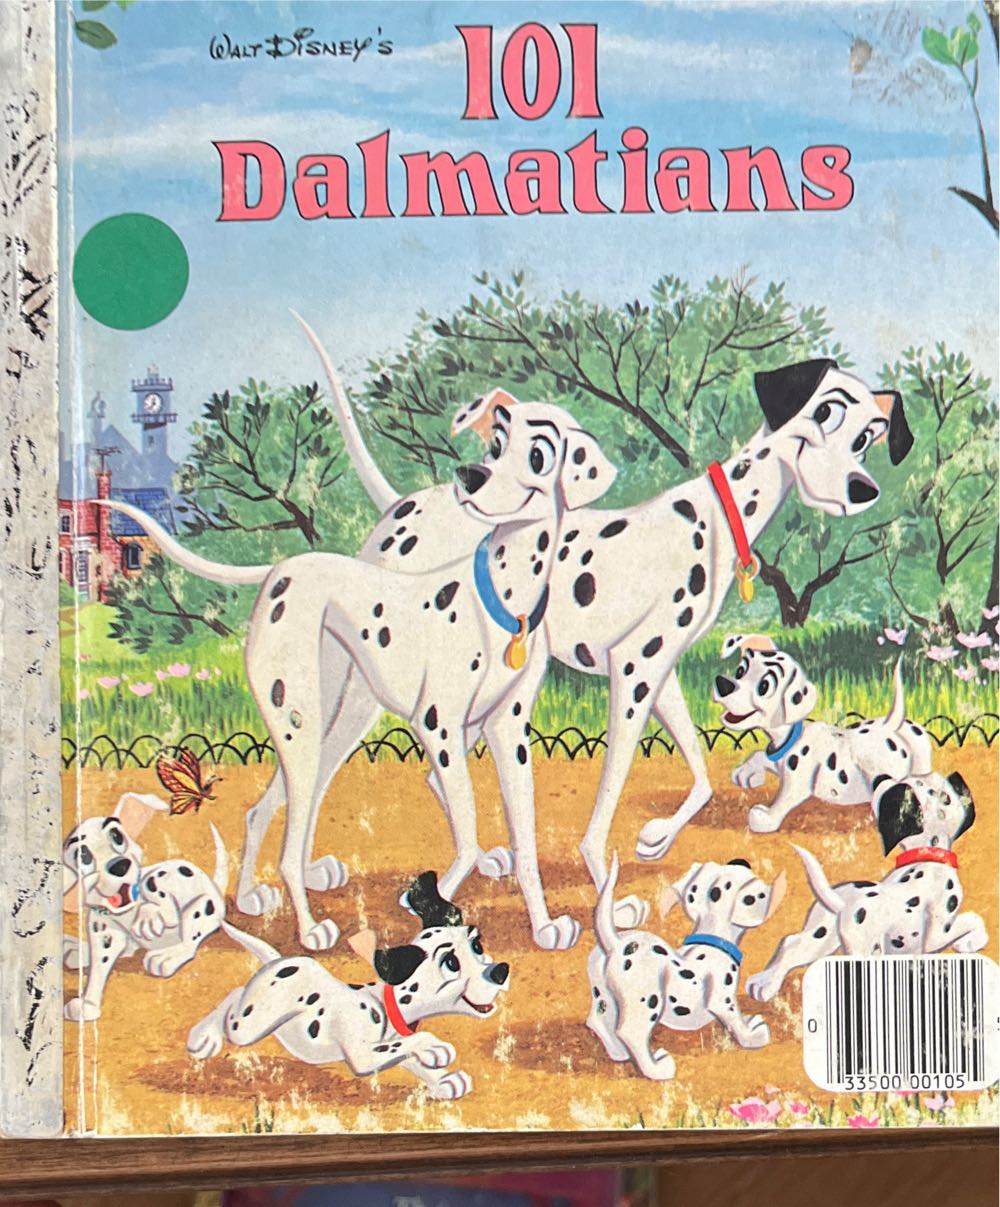 101 Dalmations - Author Unknown (Western Publishing Company, Inc. - Hardcover) book collectible [Barcode 9780307020376] - Main Image 1